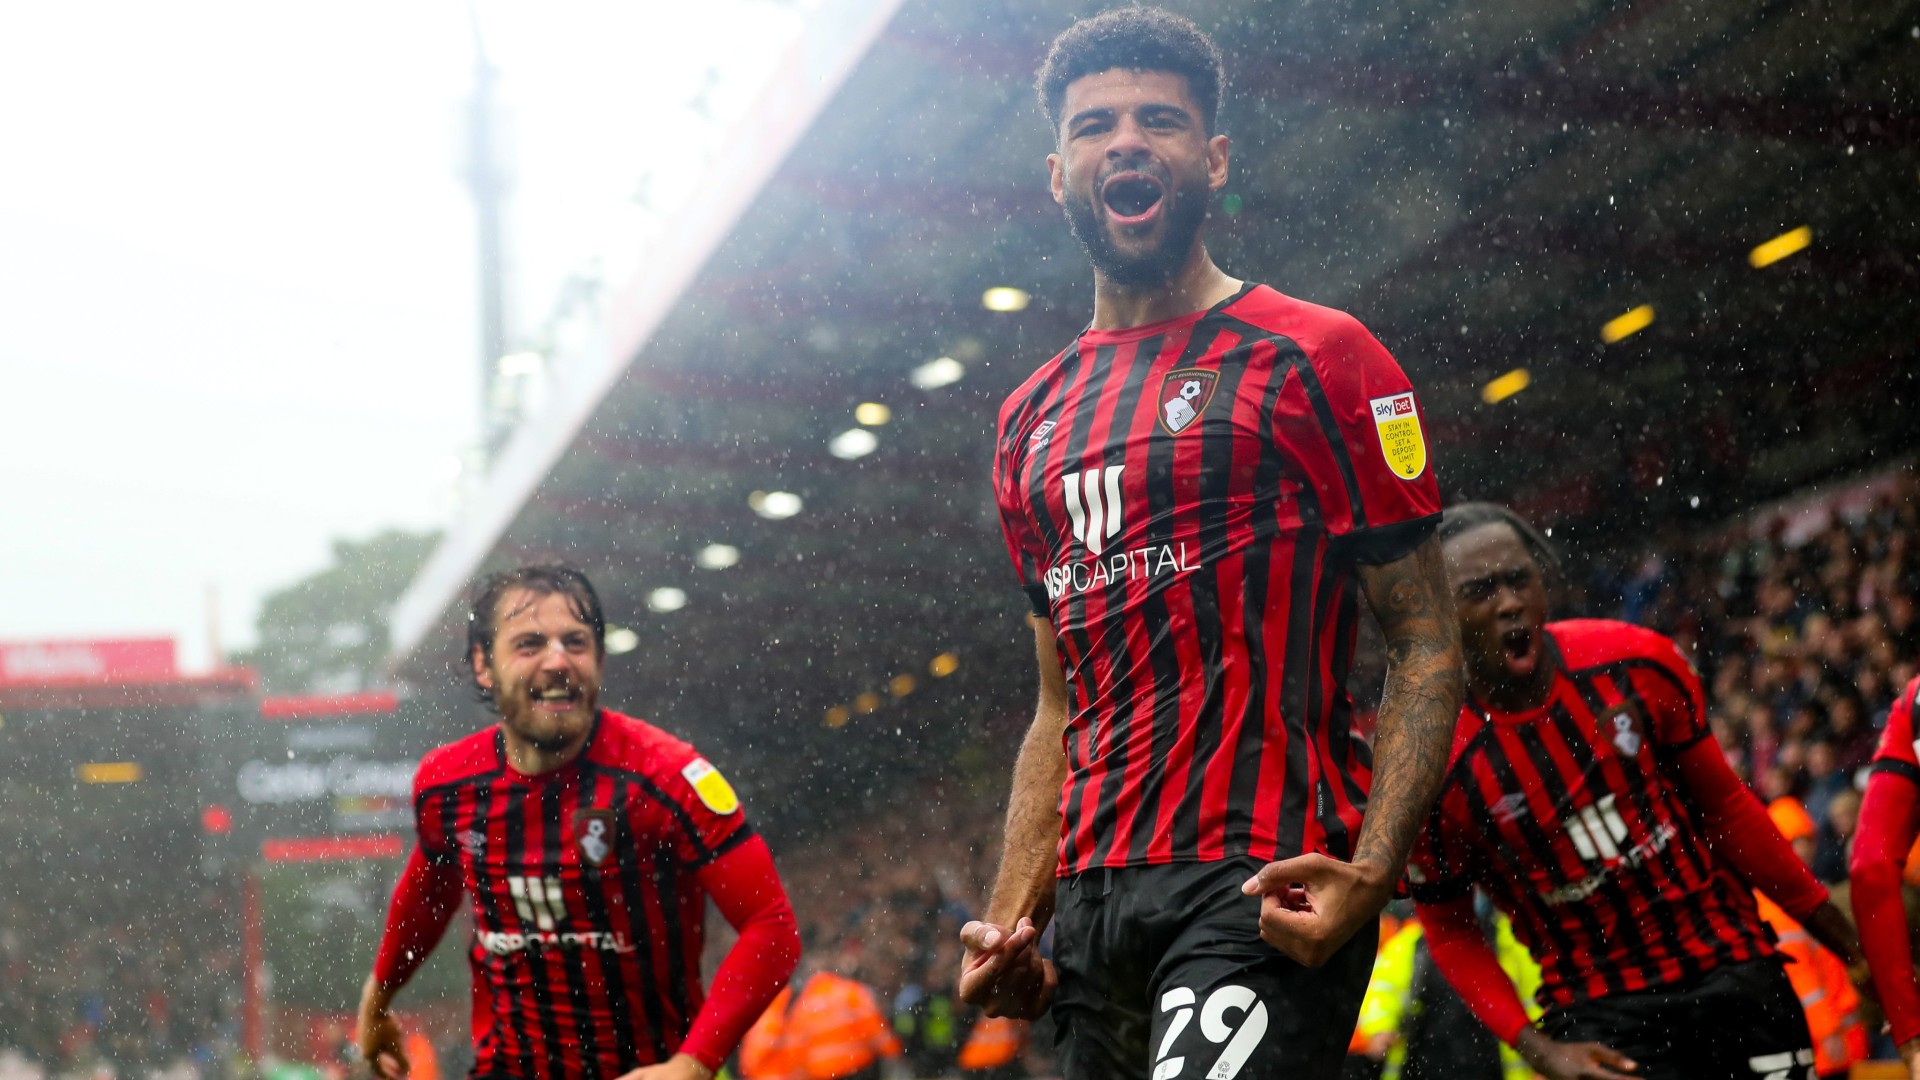 Solanke at the double as AFC Bournemouth extend Championship dominance